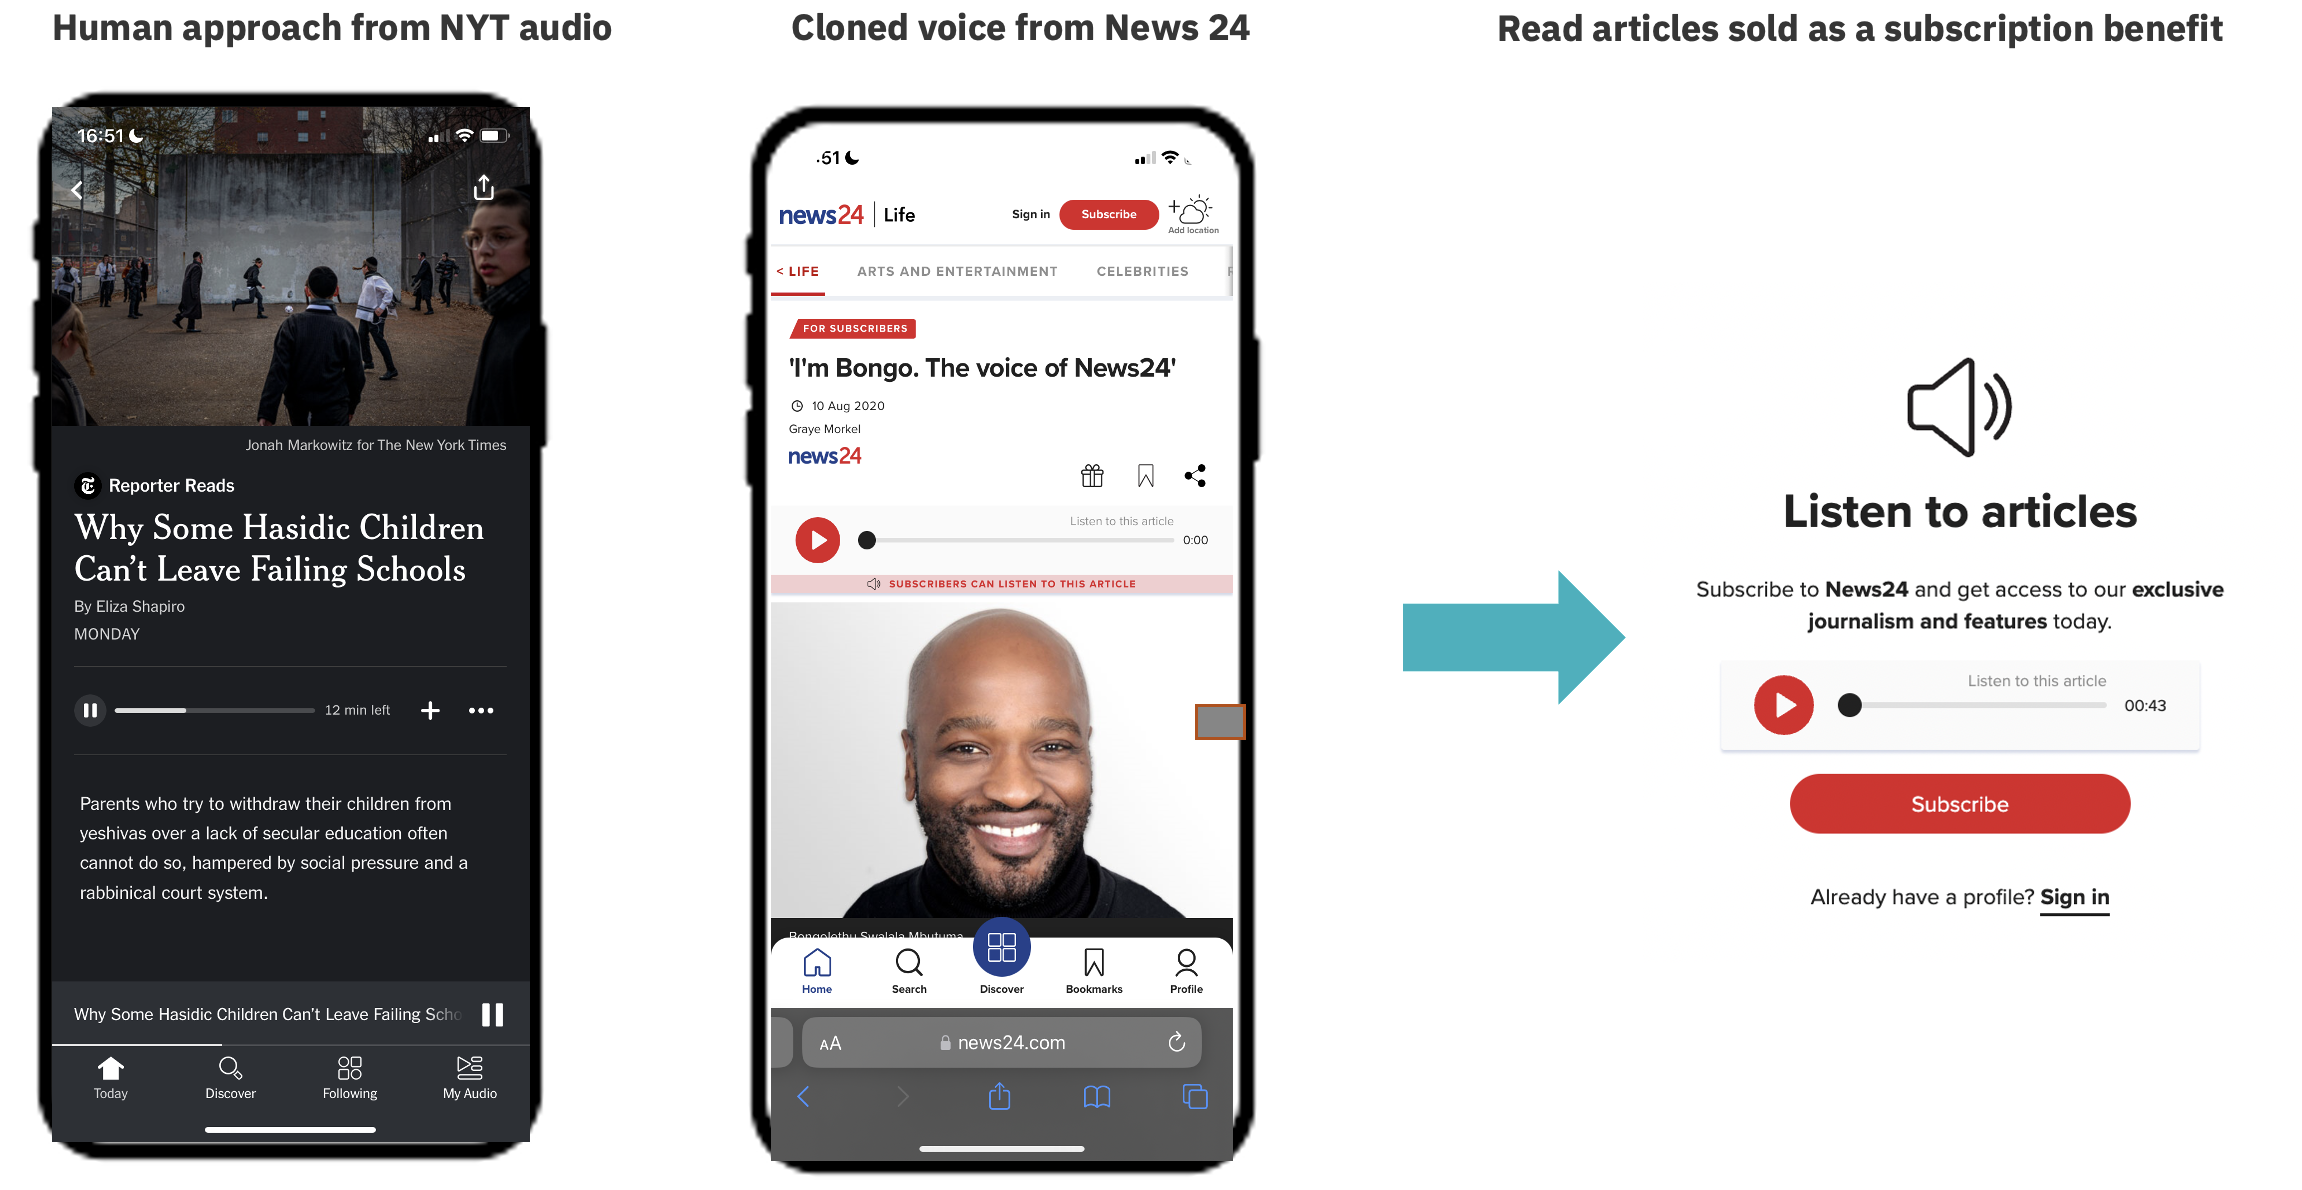 Examples of audio-based news